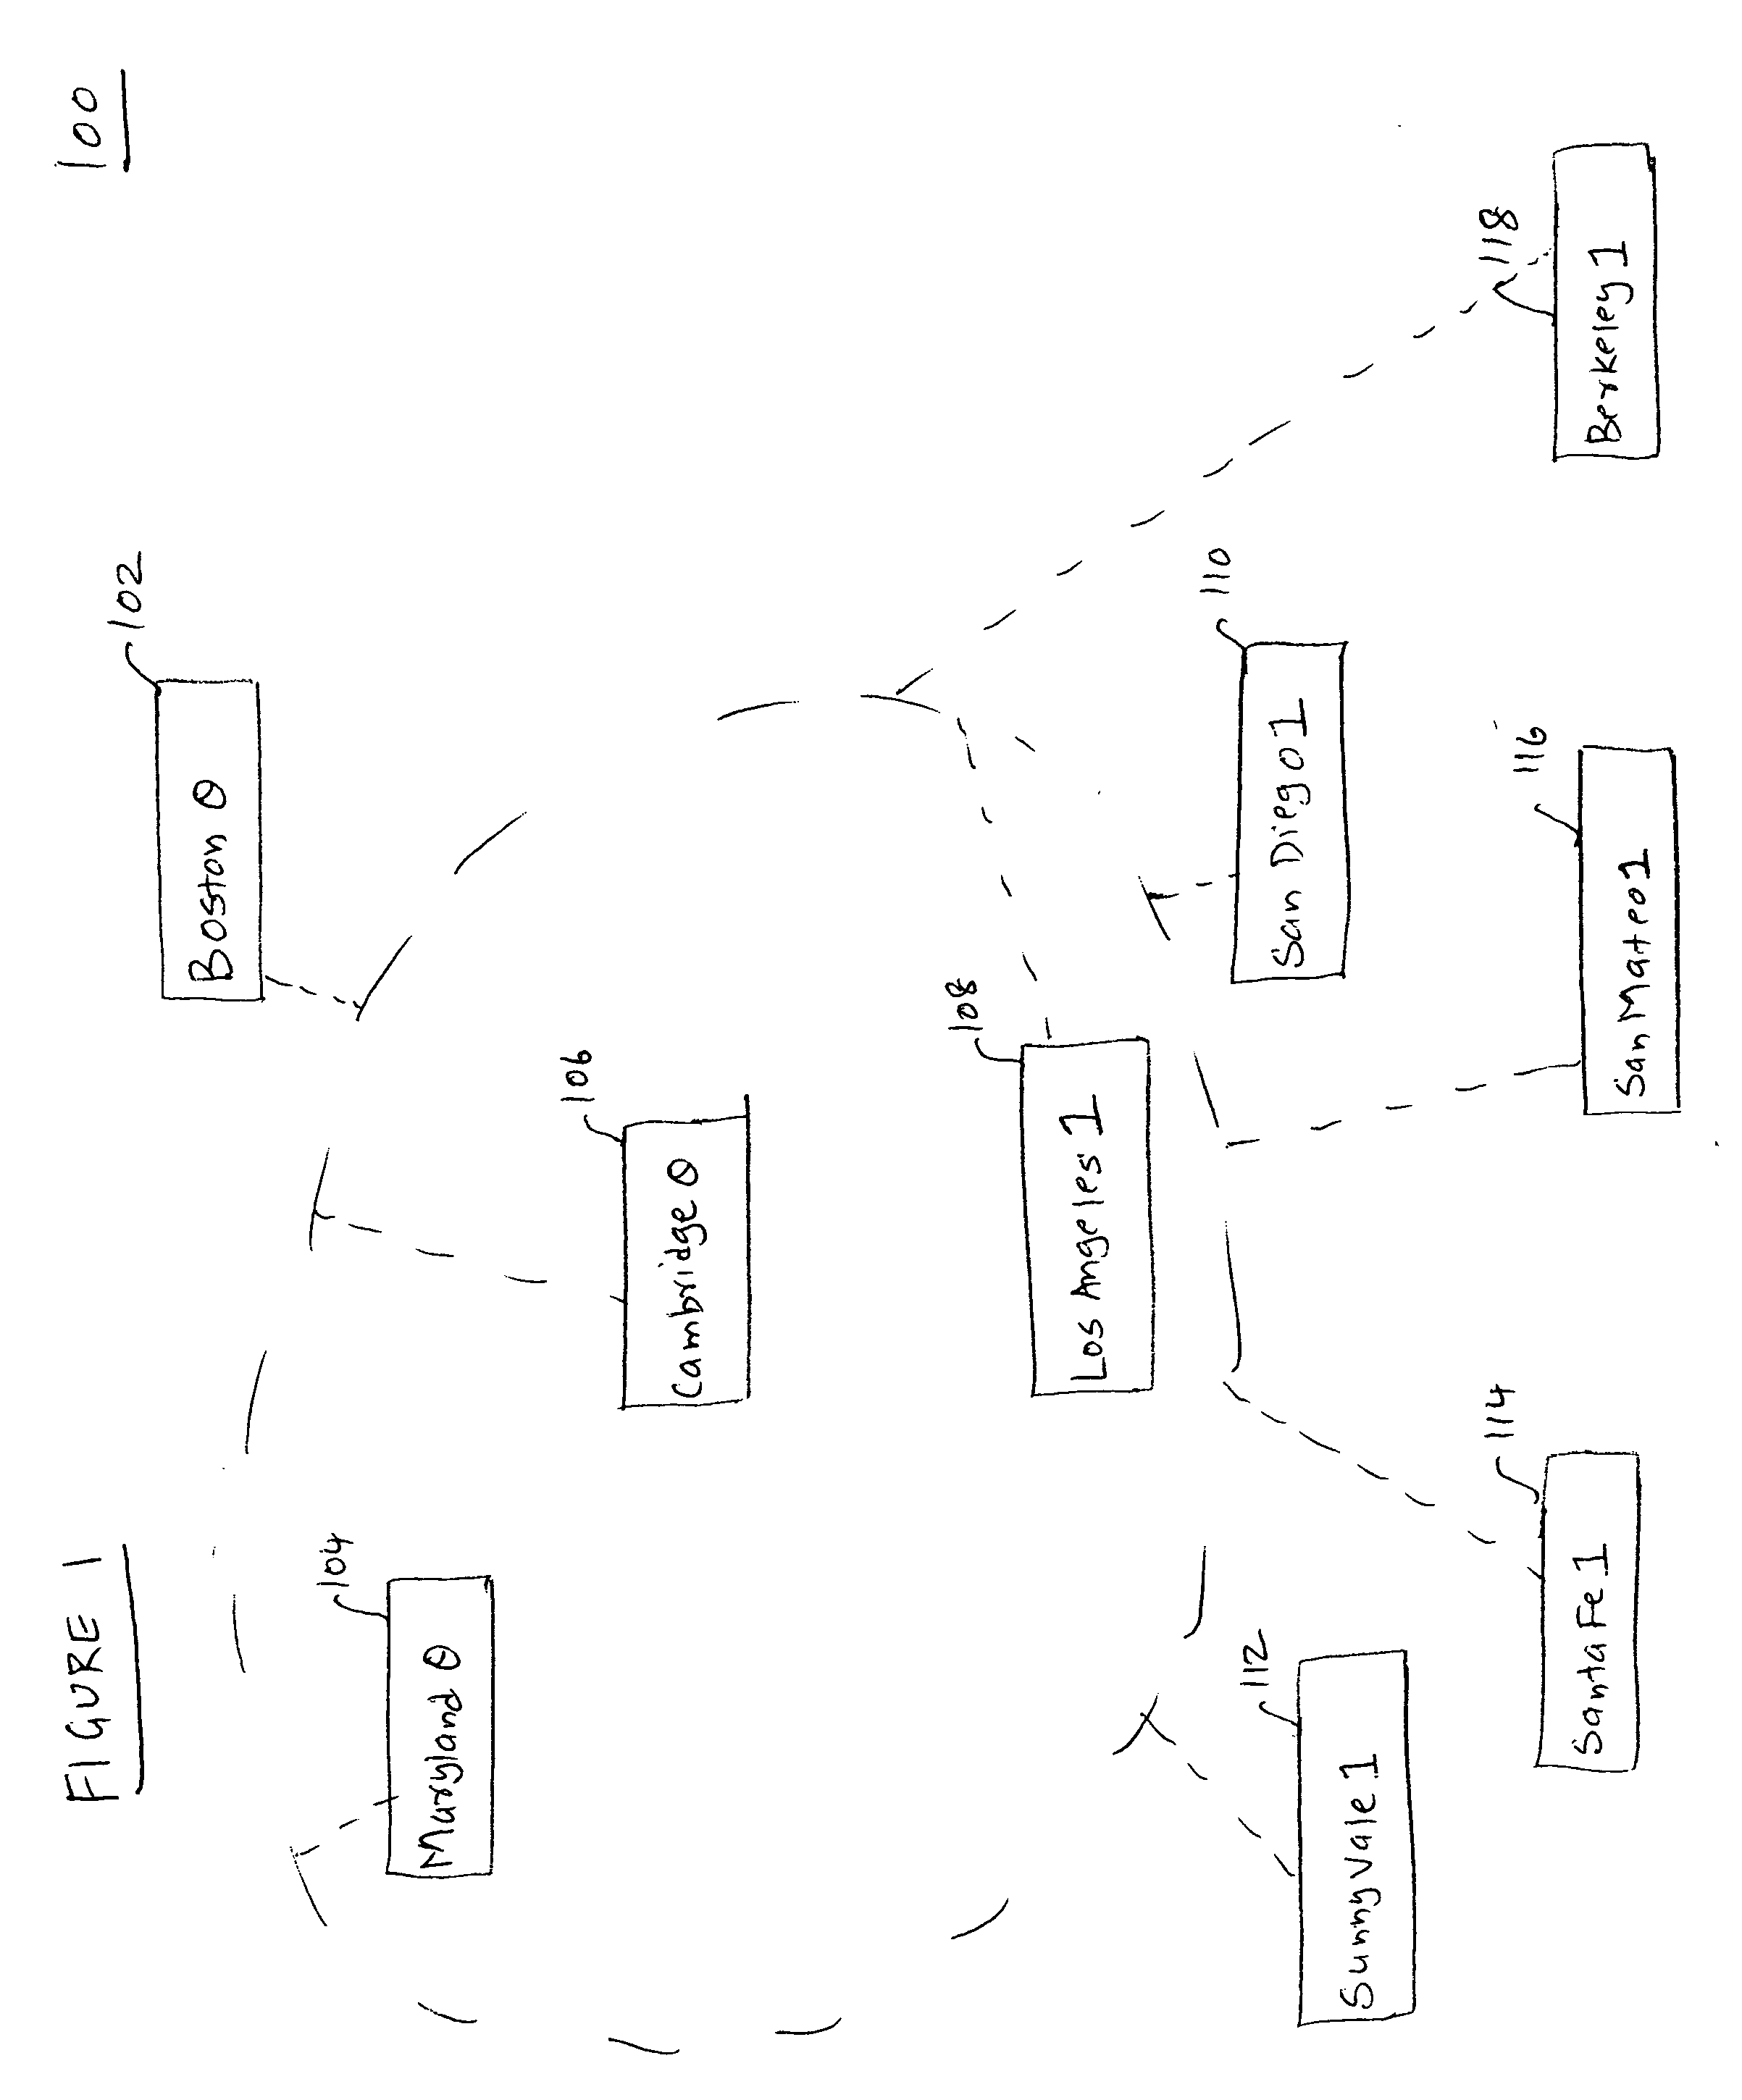 Method and system for generating an annotated network topology